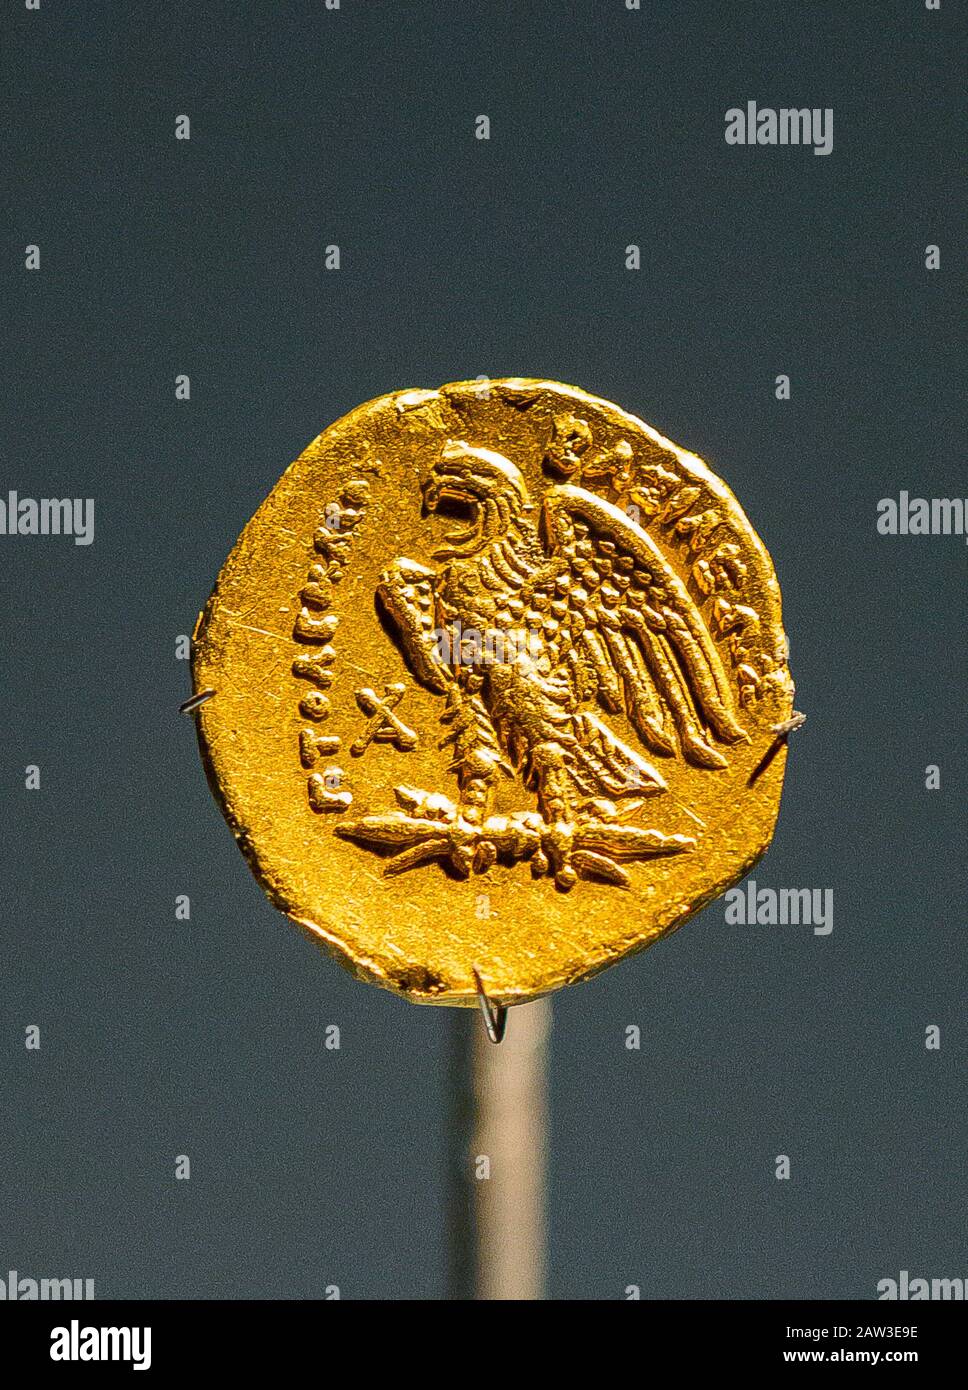 Opening visit of the exhibition “Osiris, Egypt's Sunken Mysteries”. Alexandria, Graeco-Roman Museum, a golden coin with an eagle. Stock Photo